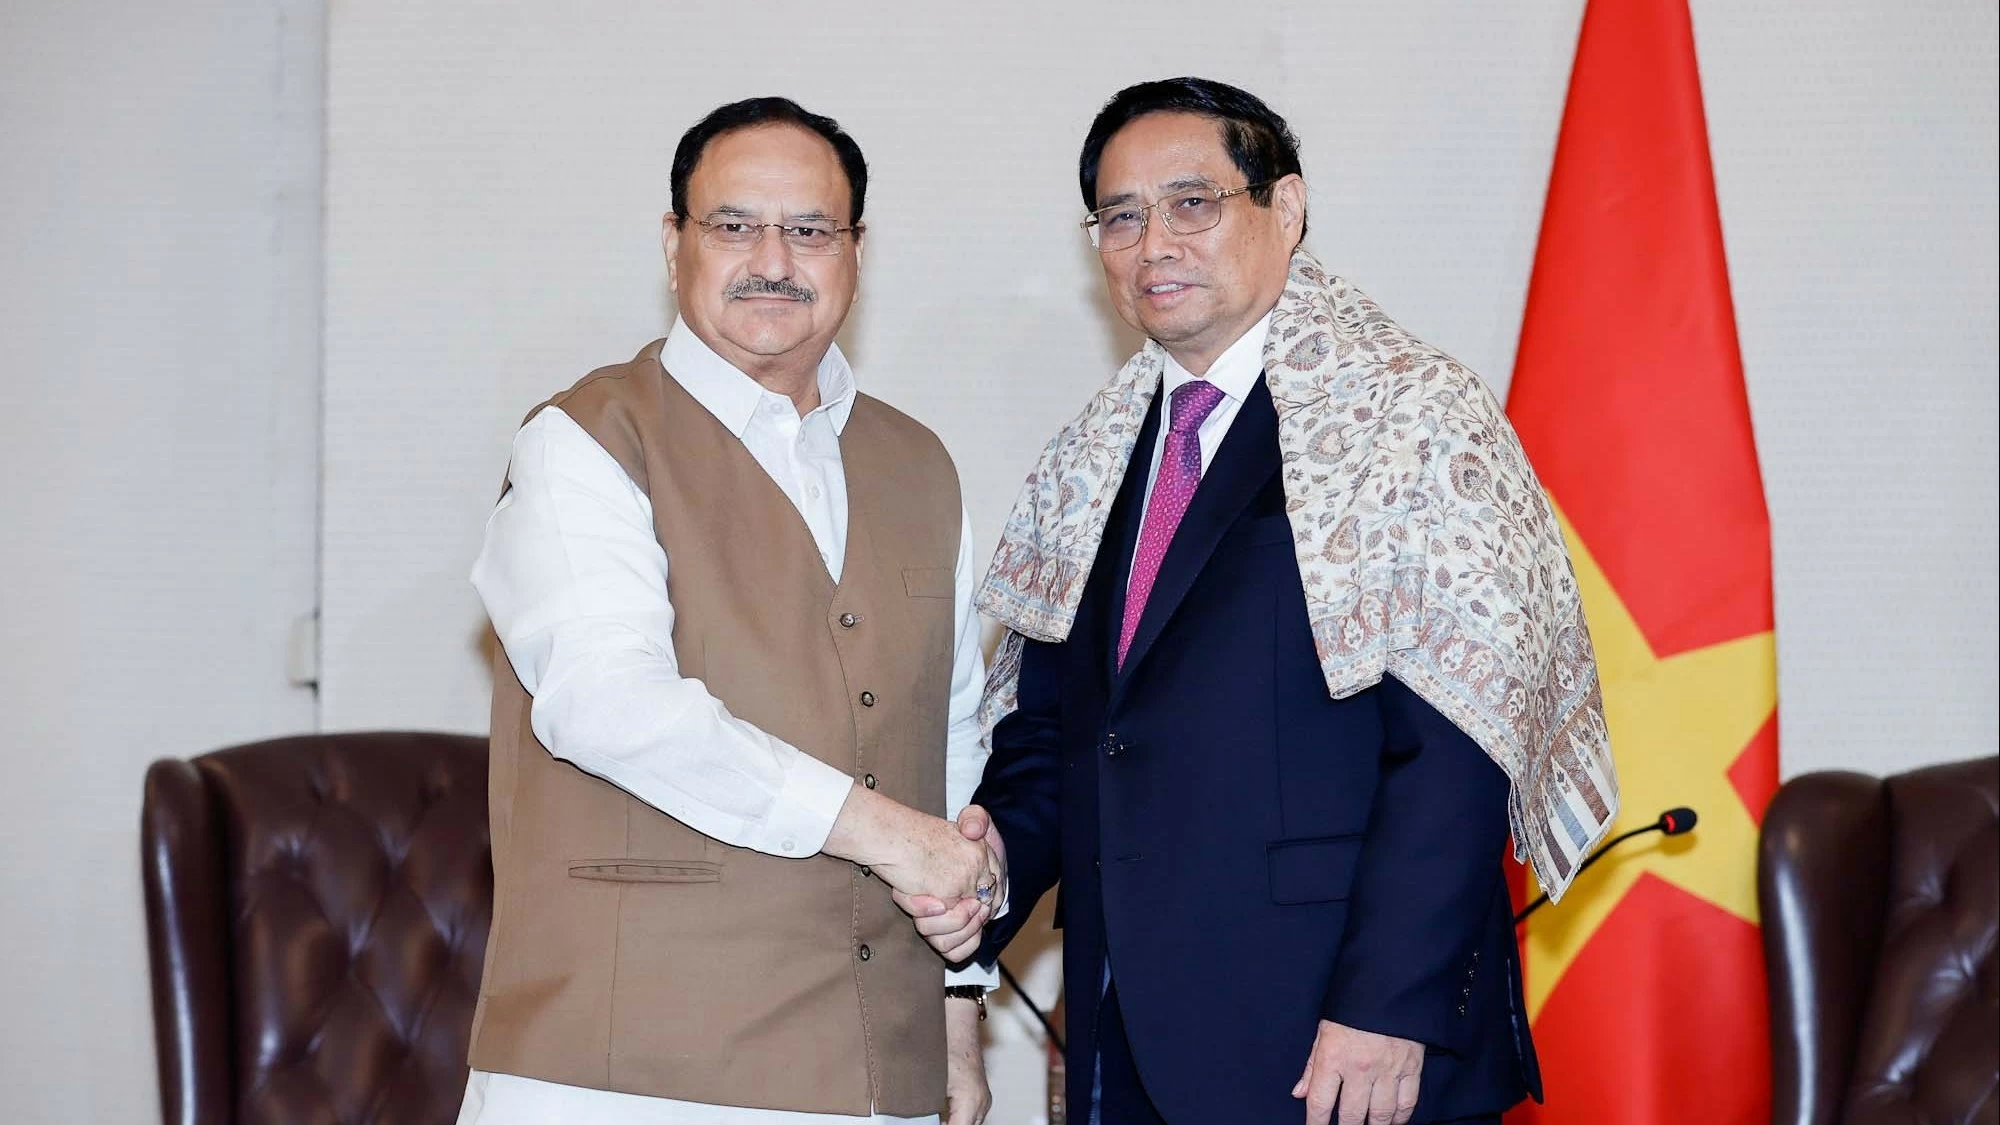 PM Pham Minh Chinh receives leaders of Indian parties in New Delhi